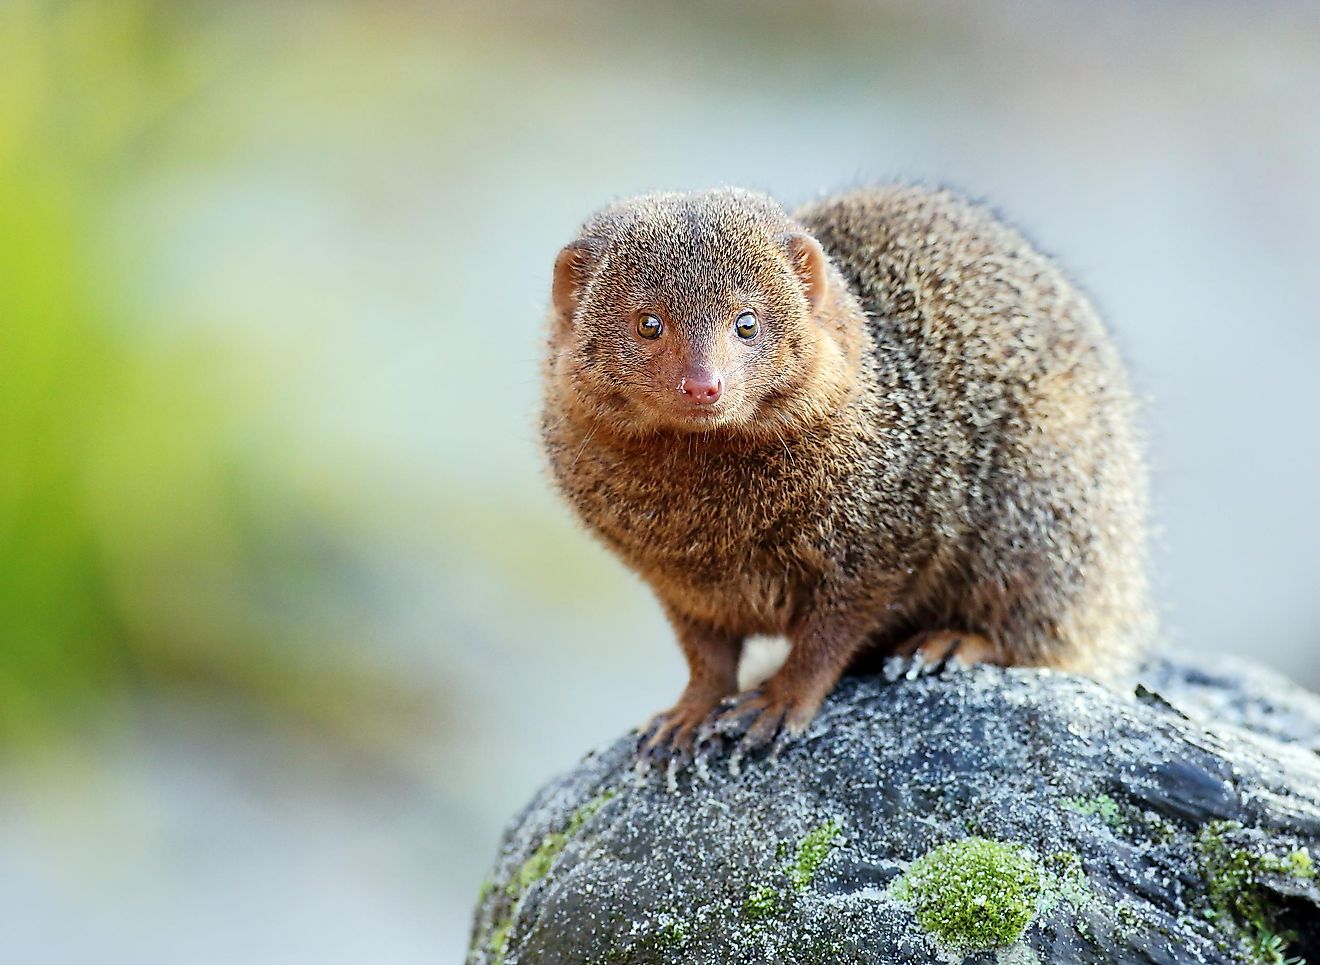 The dwarf mongoose can be found in Africa, and it is the smallest species of mongoose.